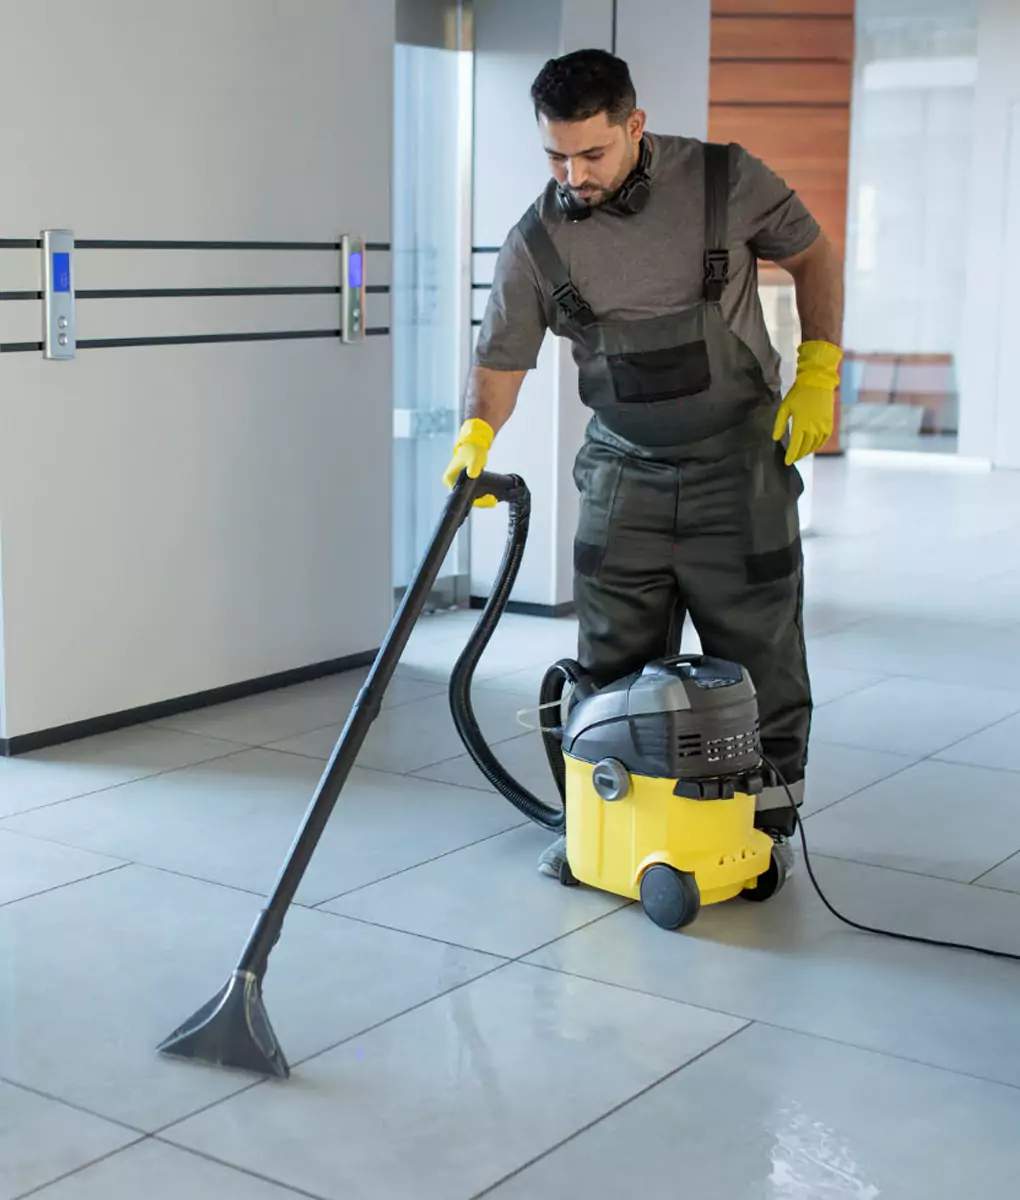 Customized Cleaning Plans for Your Business Needs